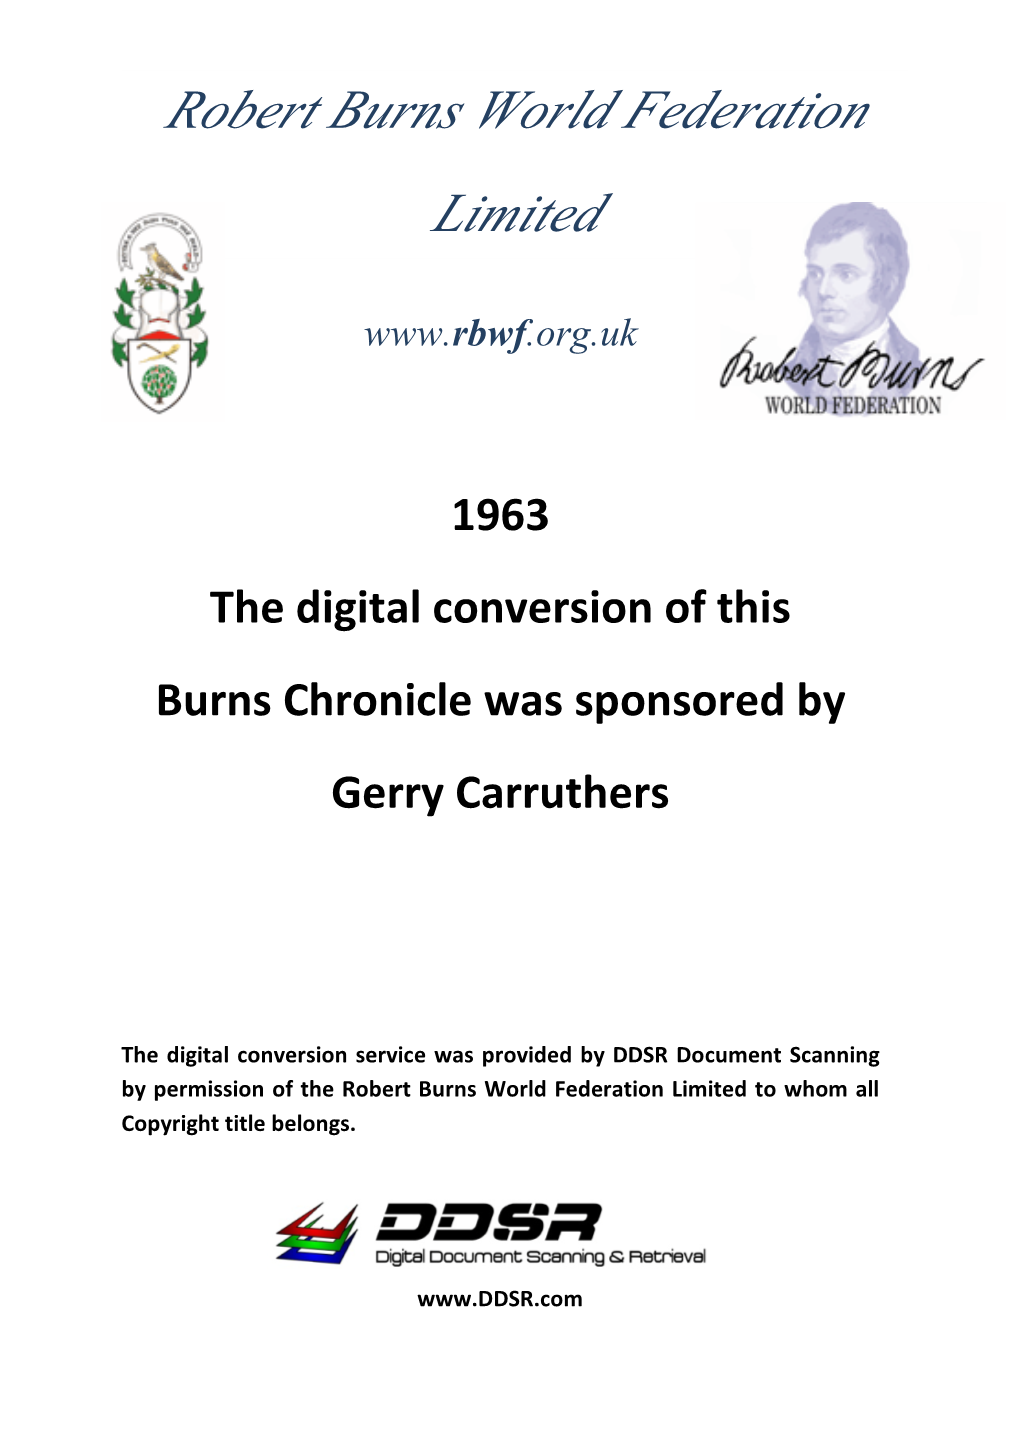 Burns Chronicle Was Sponsored by Gerry Carruthers